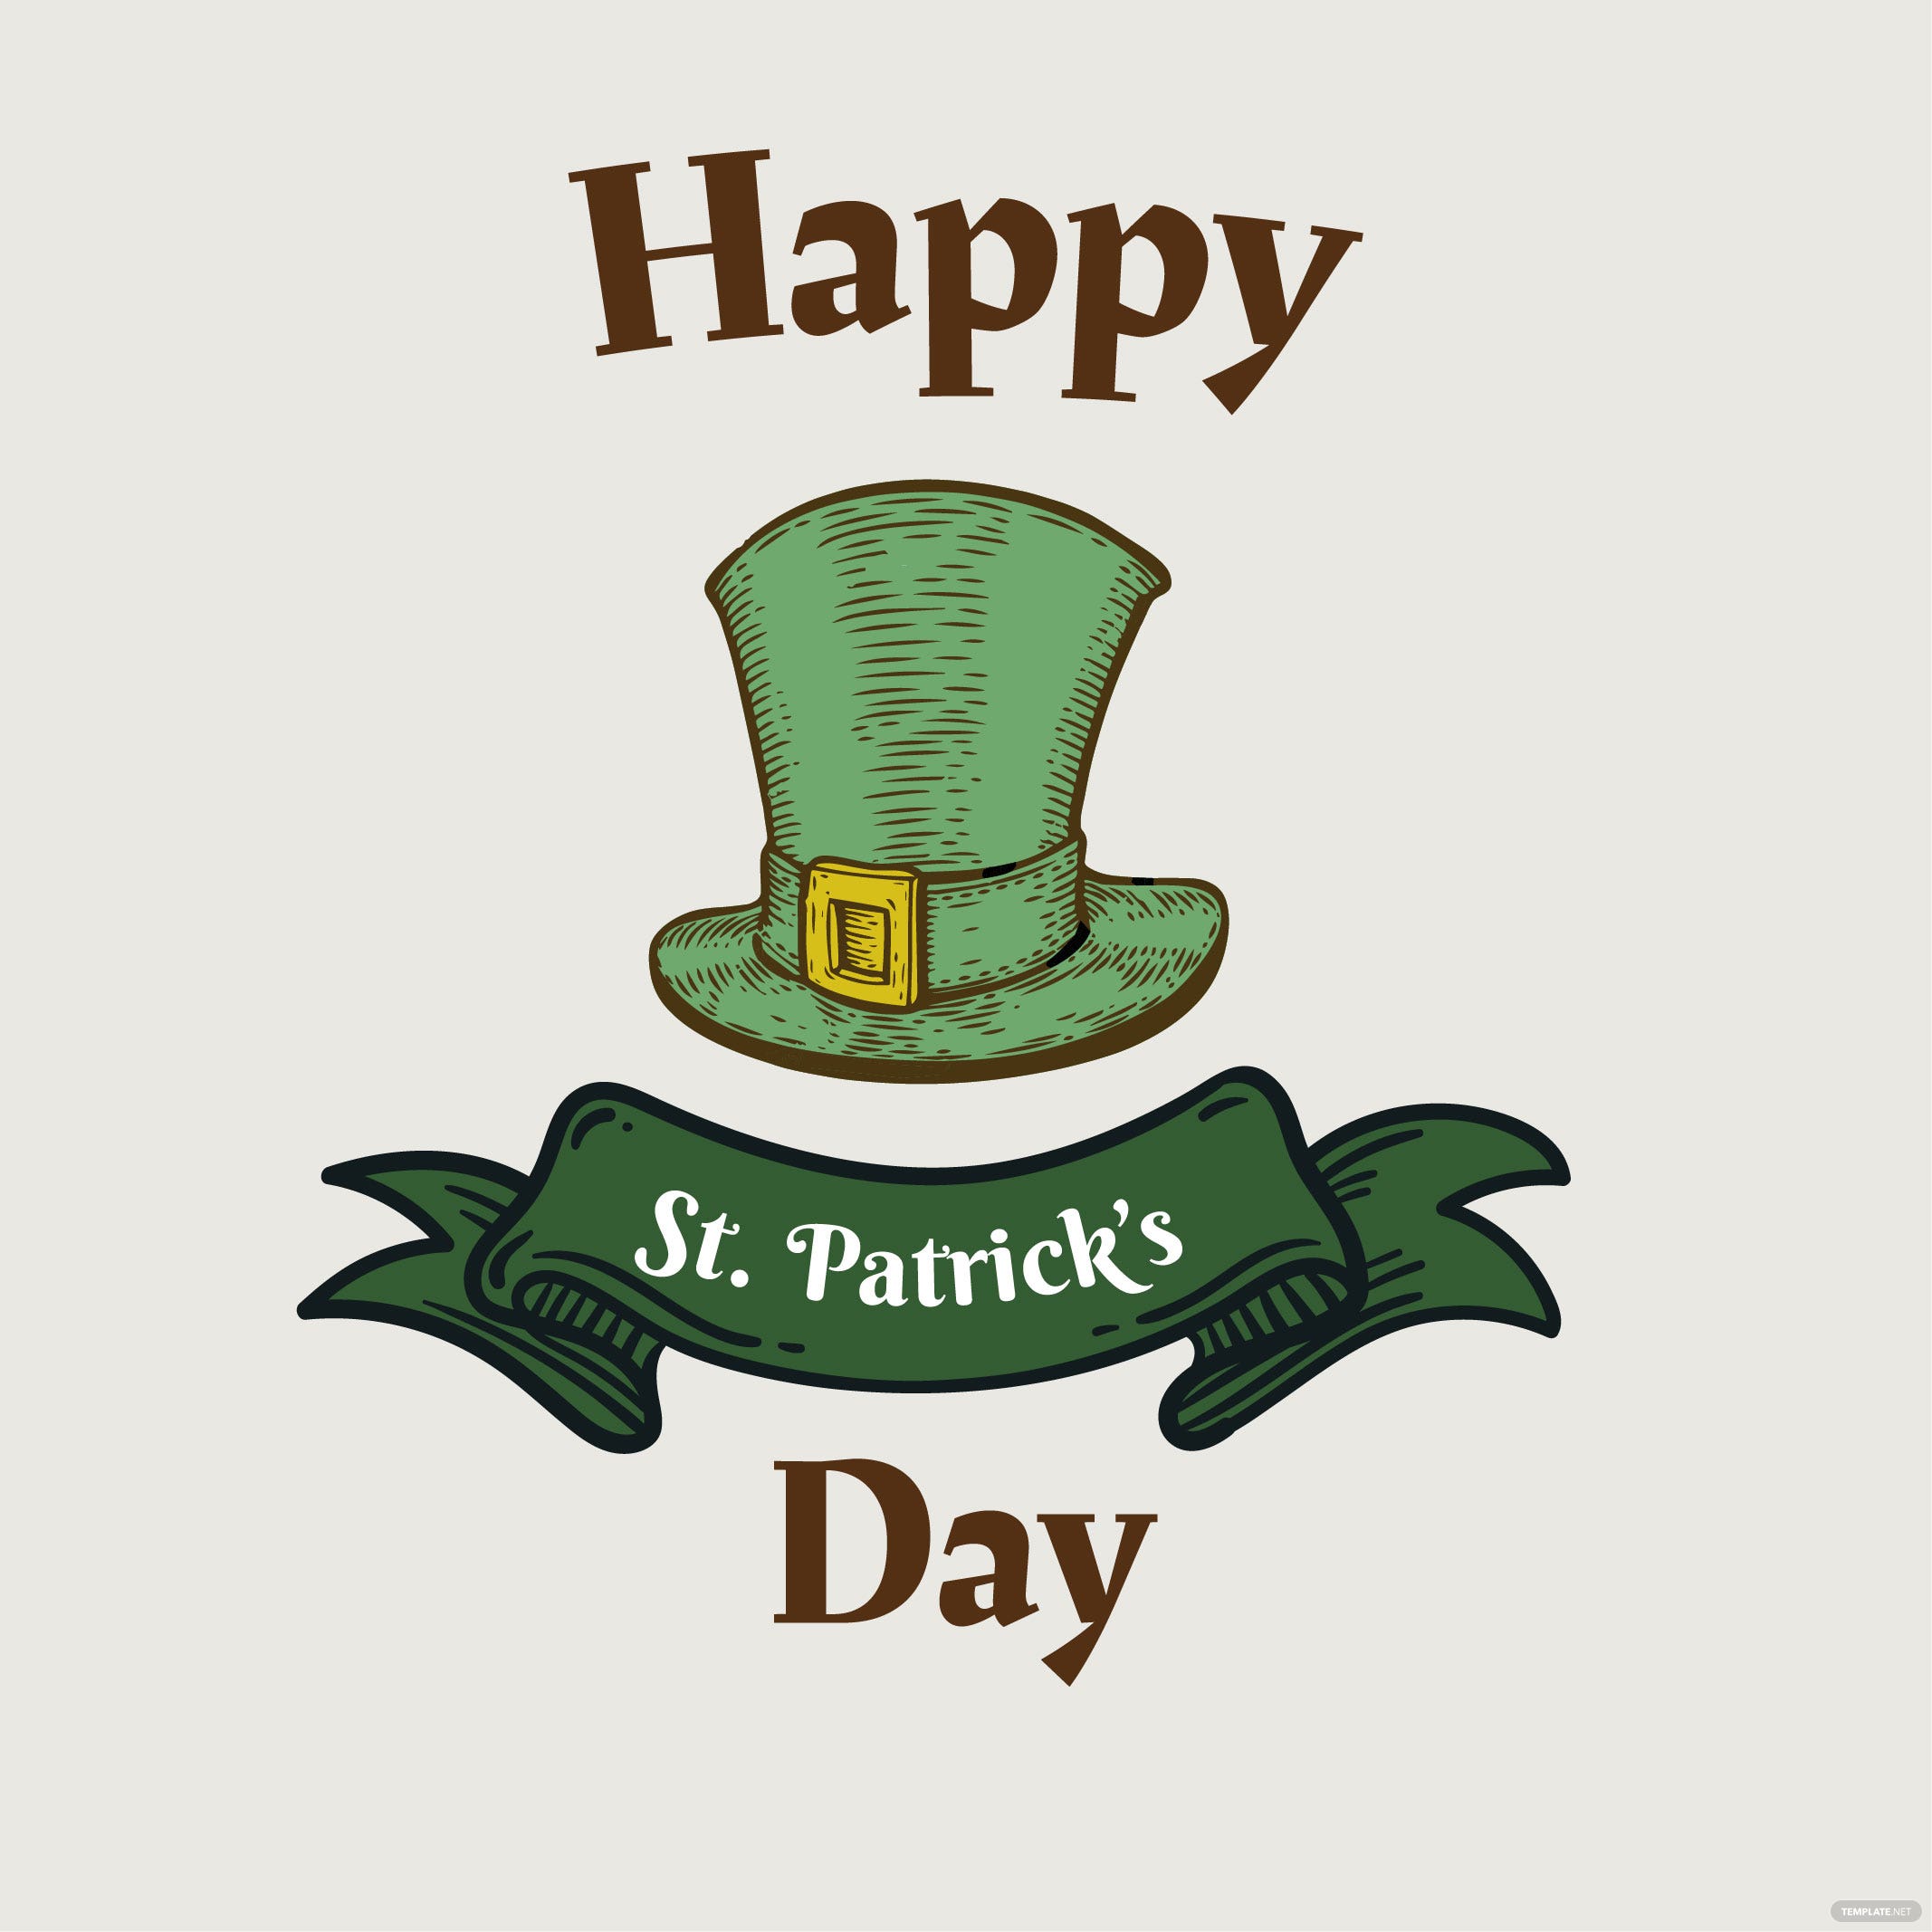 St. Patrick's Day When Is St. Patrick's Day Meaning, Dates, Purpose